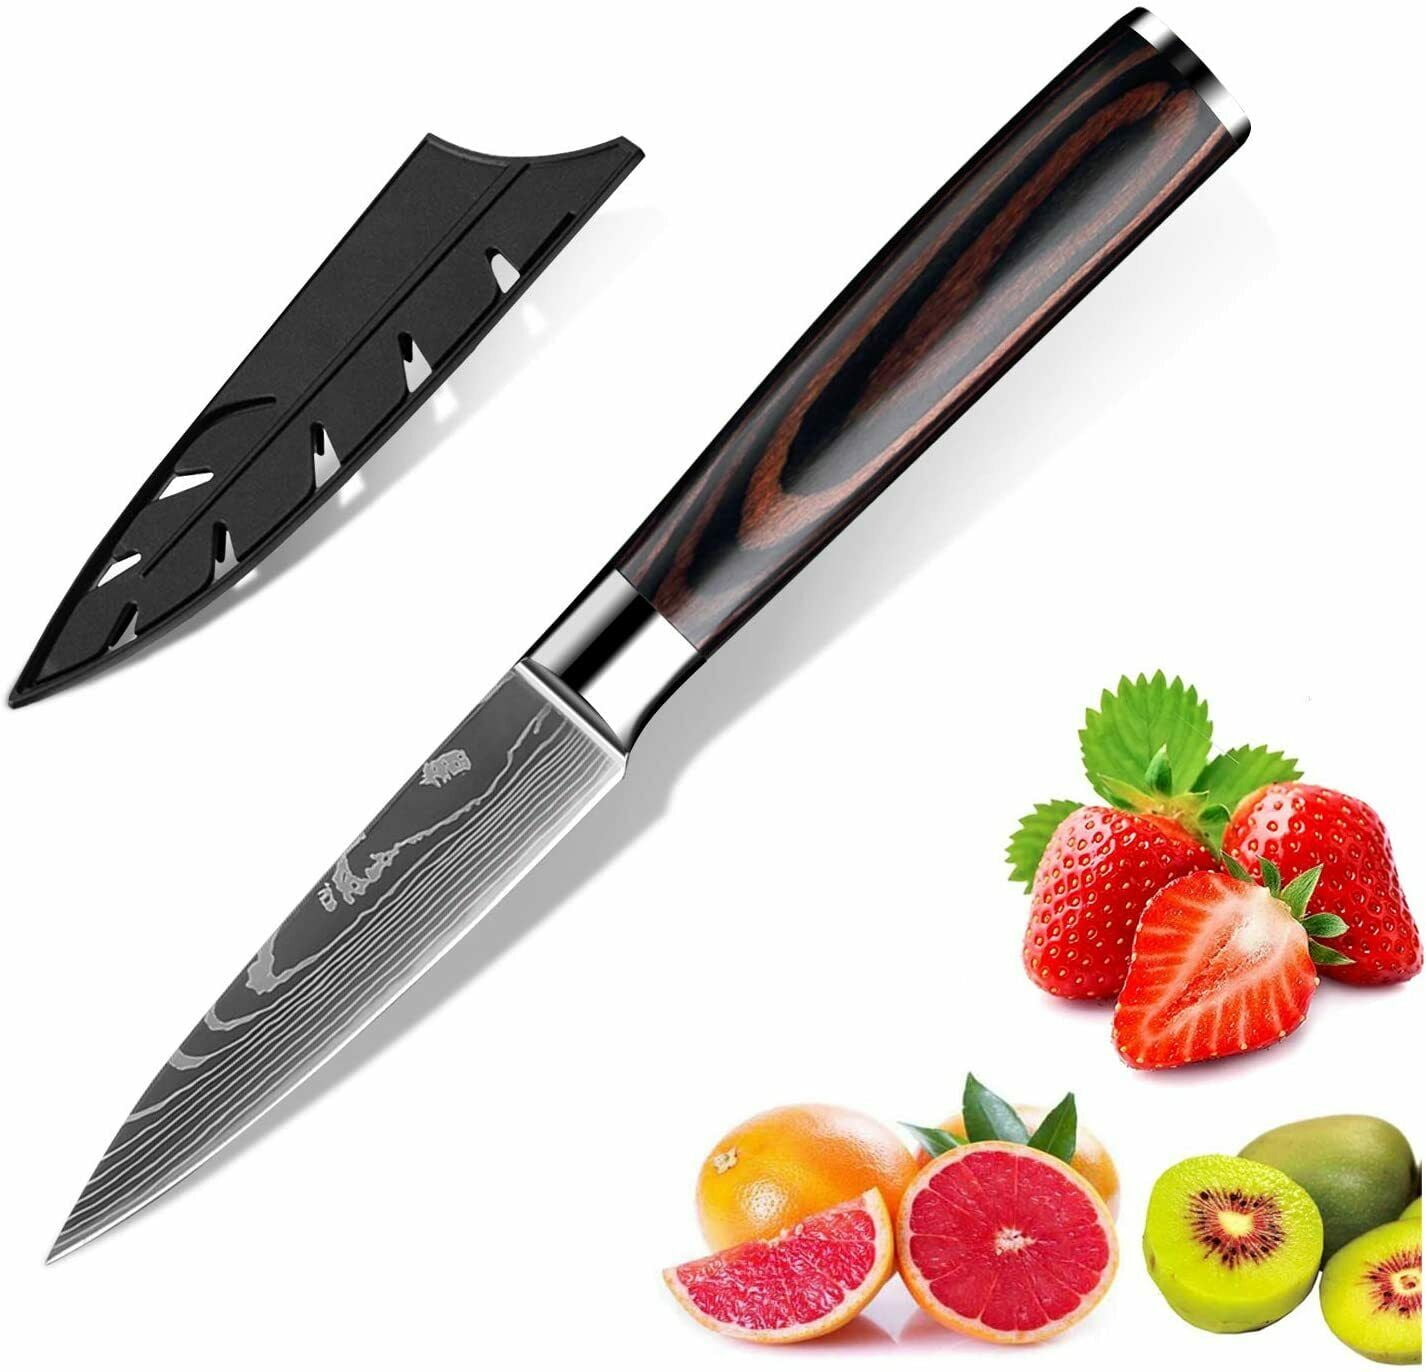 Sharp Kitchen Knives Set of 2-8.5 Inch Chef Knife & 5 Inch Kitchen Utility  Knife, Pro Chopping & Cutting Knife with High Carbon 7CR17MOV Stainless